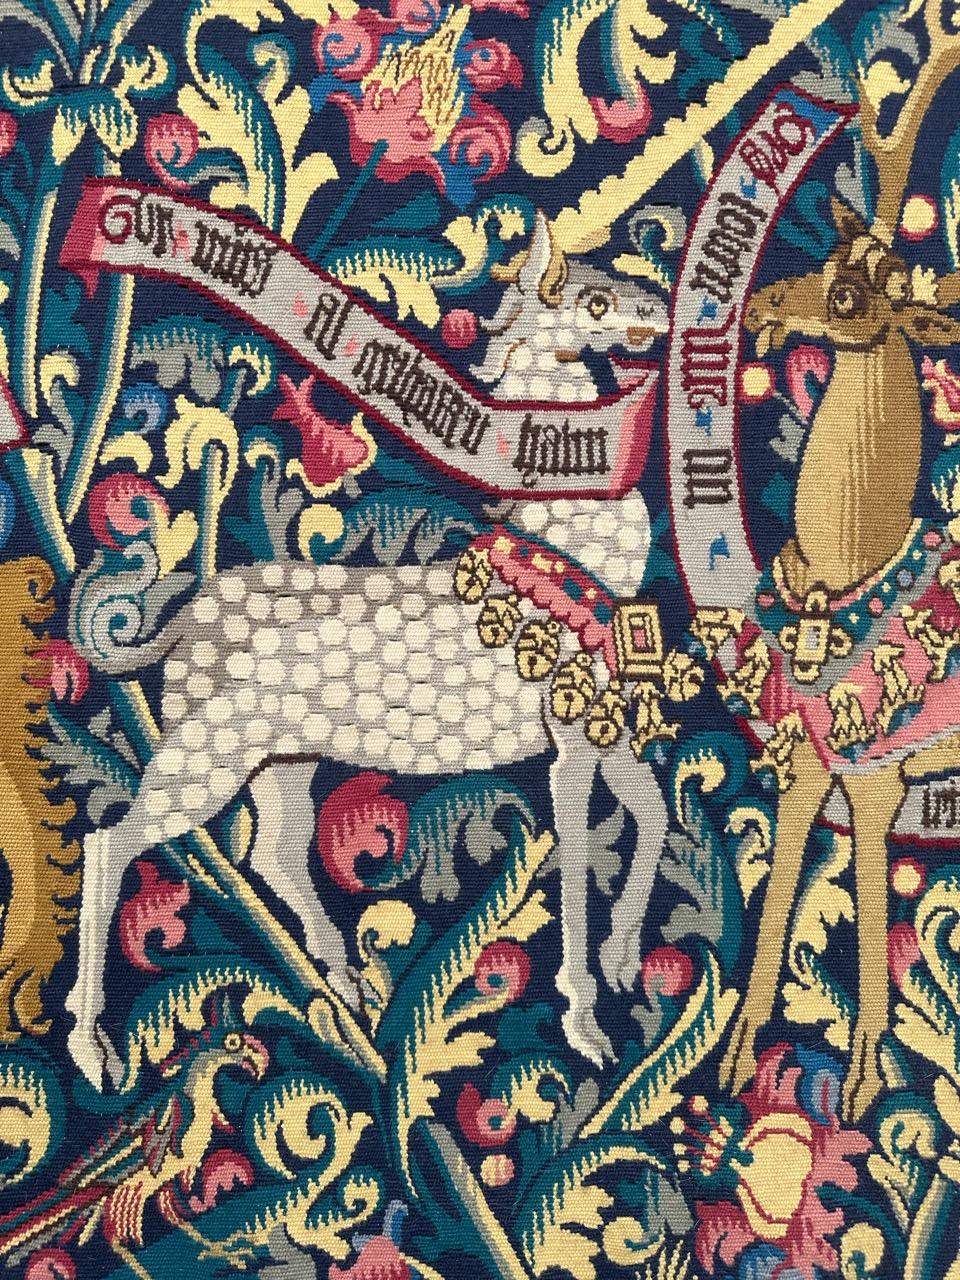 Exquisite French tapestry from the mid-20th century, handwoven in the renowned Aubusson workshops. This masterpiece replicates a 15th-century museum tapestry, featuring heraldic motifs of a lion, unicorn, and stag. Woven with precision in wool and